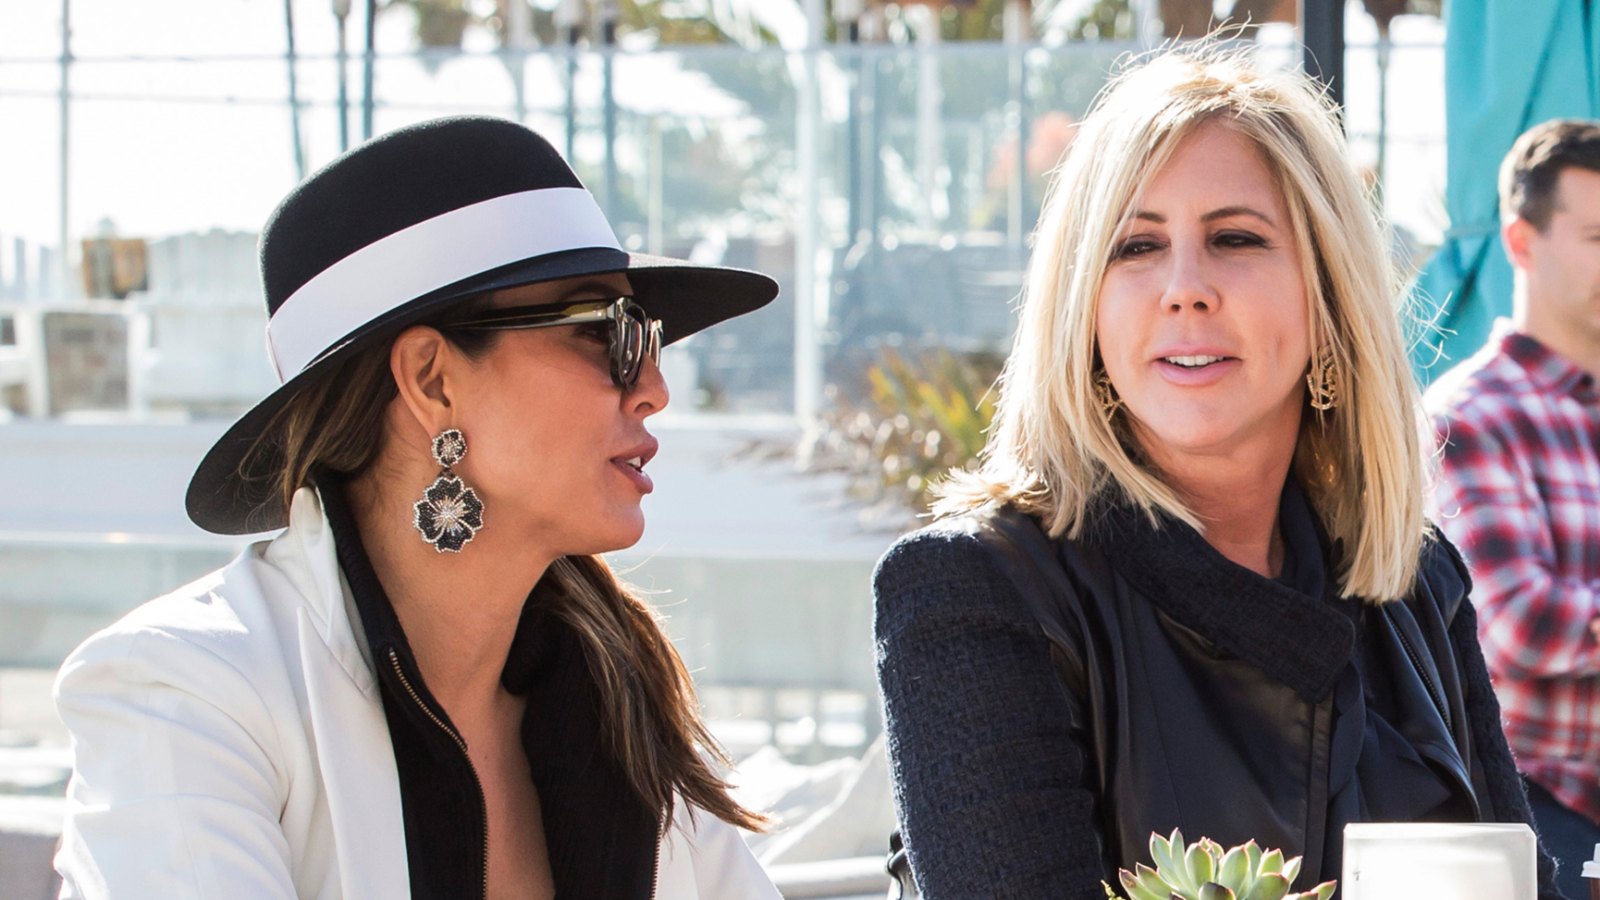 Kelly Dodd Fires Back After ‘RHOC’ Costar Vicki Gunvalson Slams Her Career: ‘I’m Sorry If You’re Jealous’